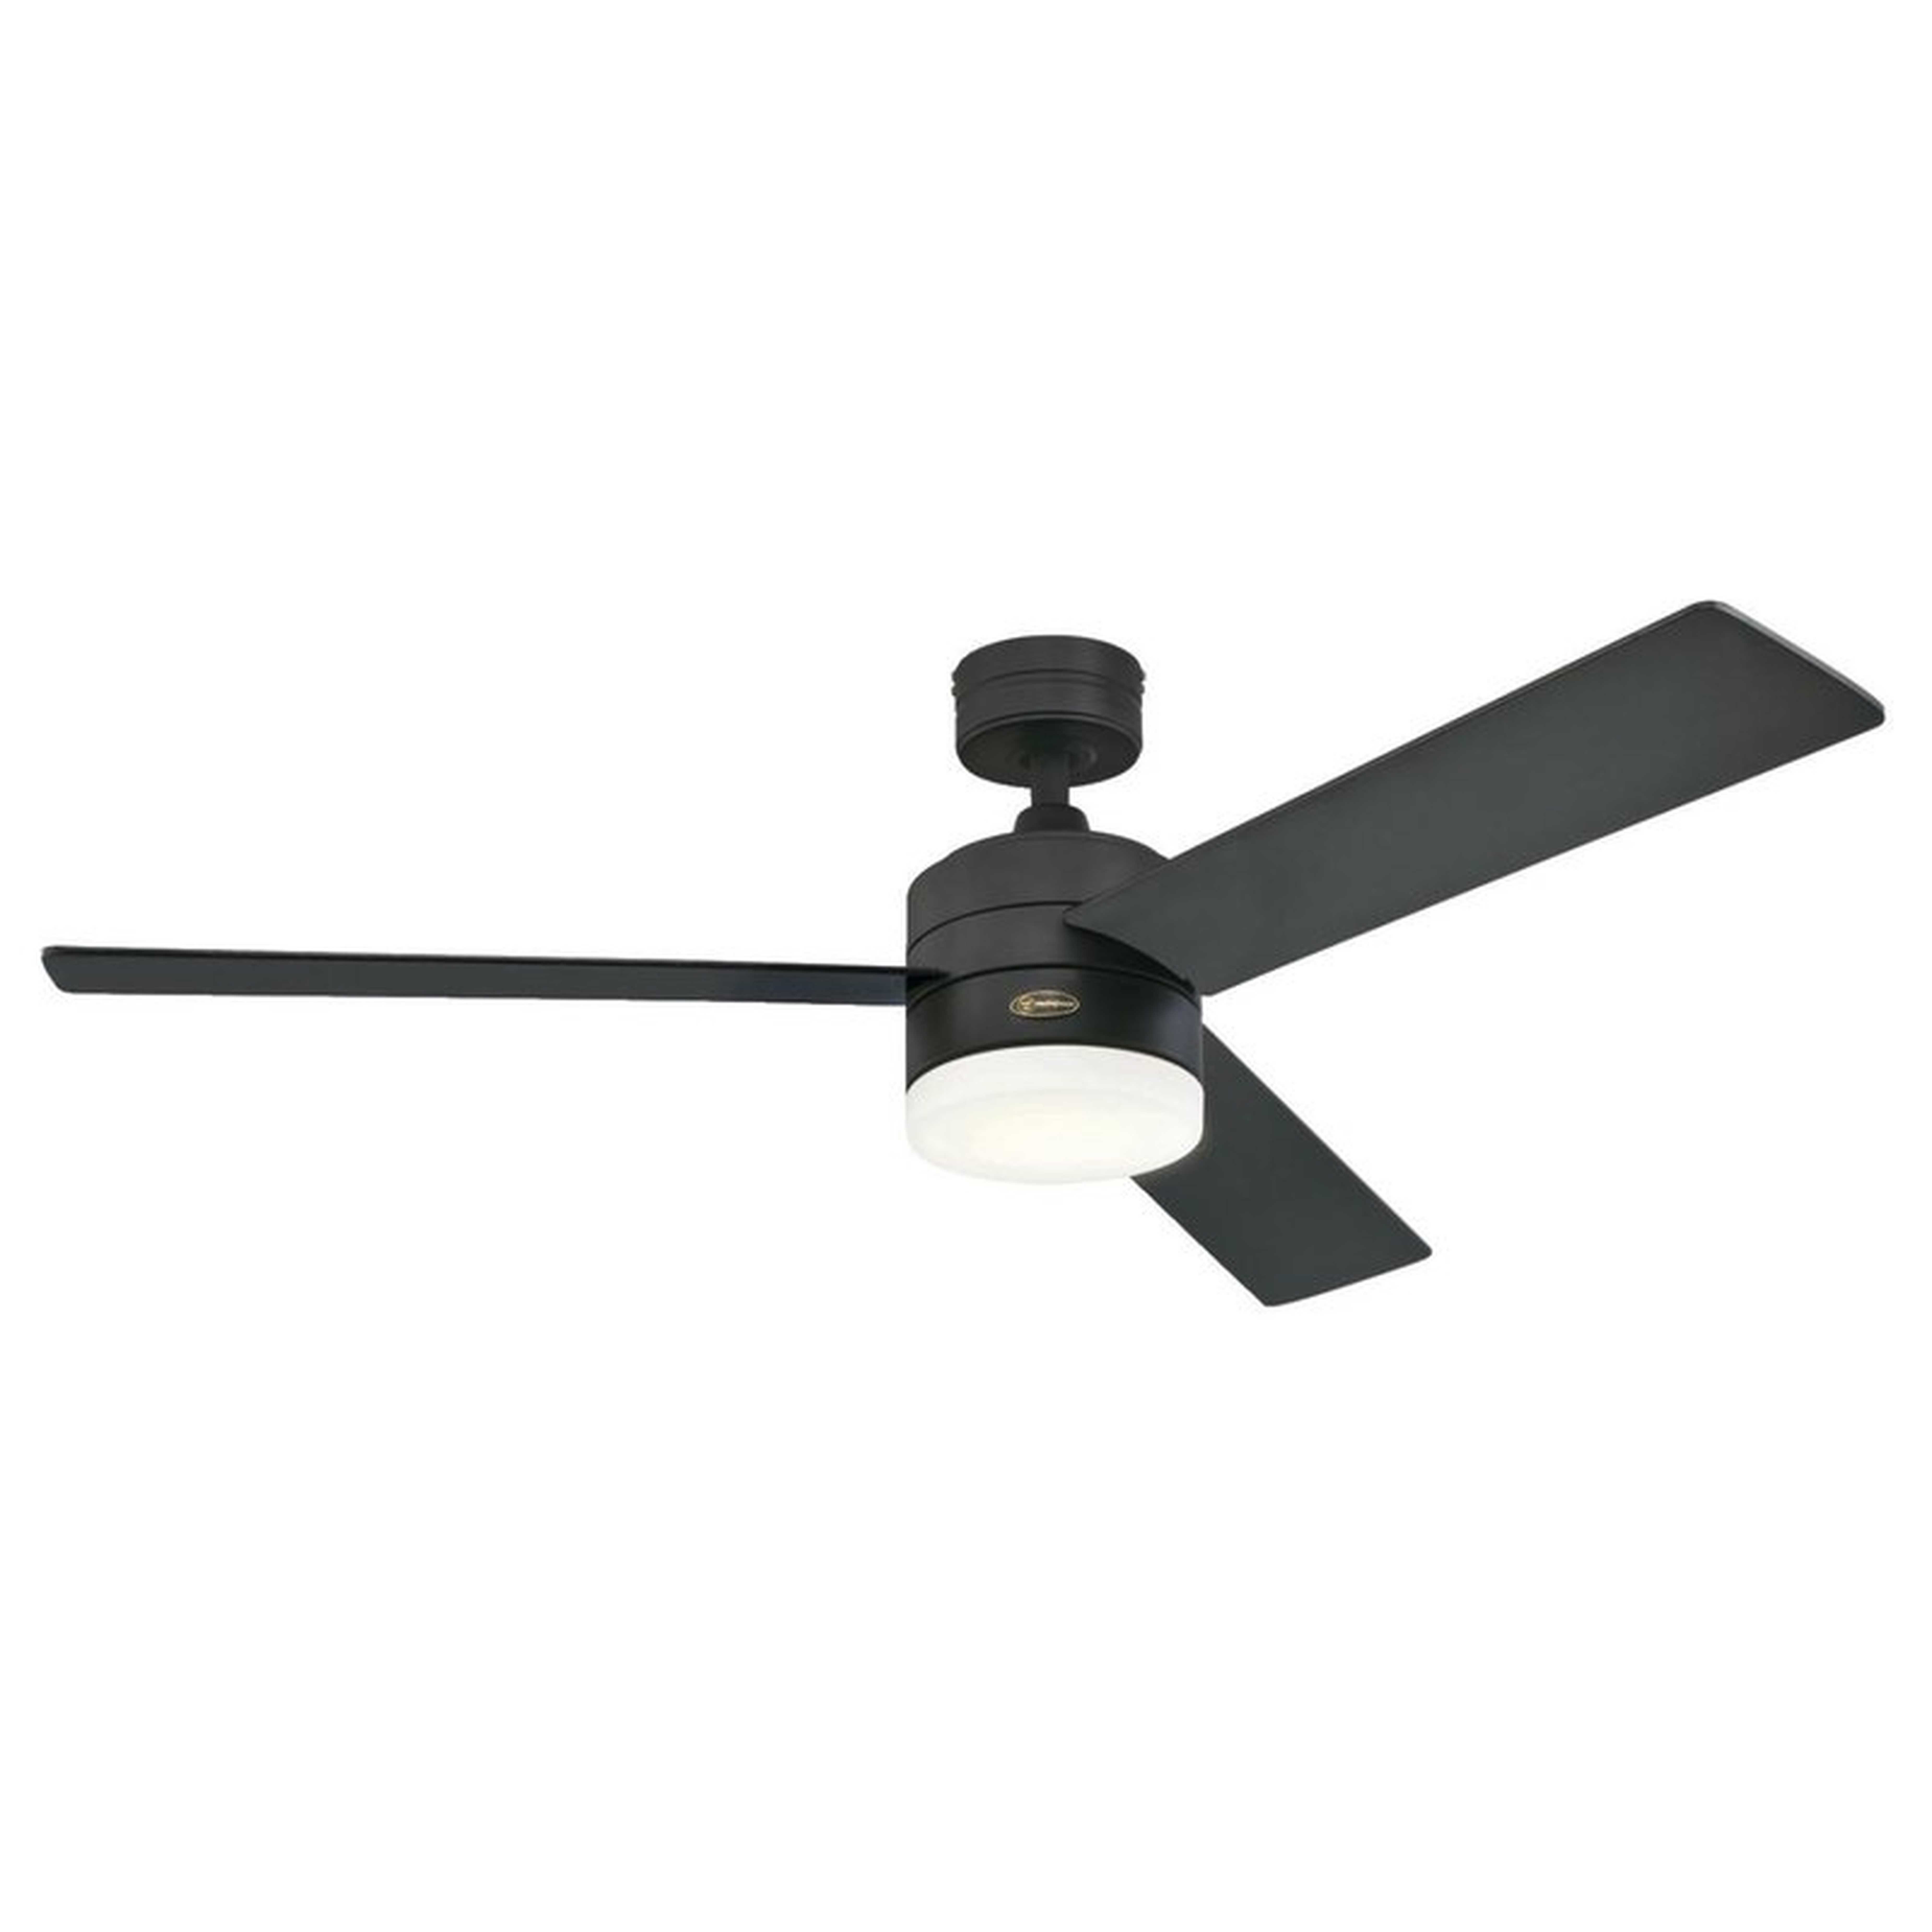 52" Luray 3 Blade LED Ceiling Fan with Remote, Light Kit Included - AllModern